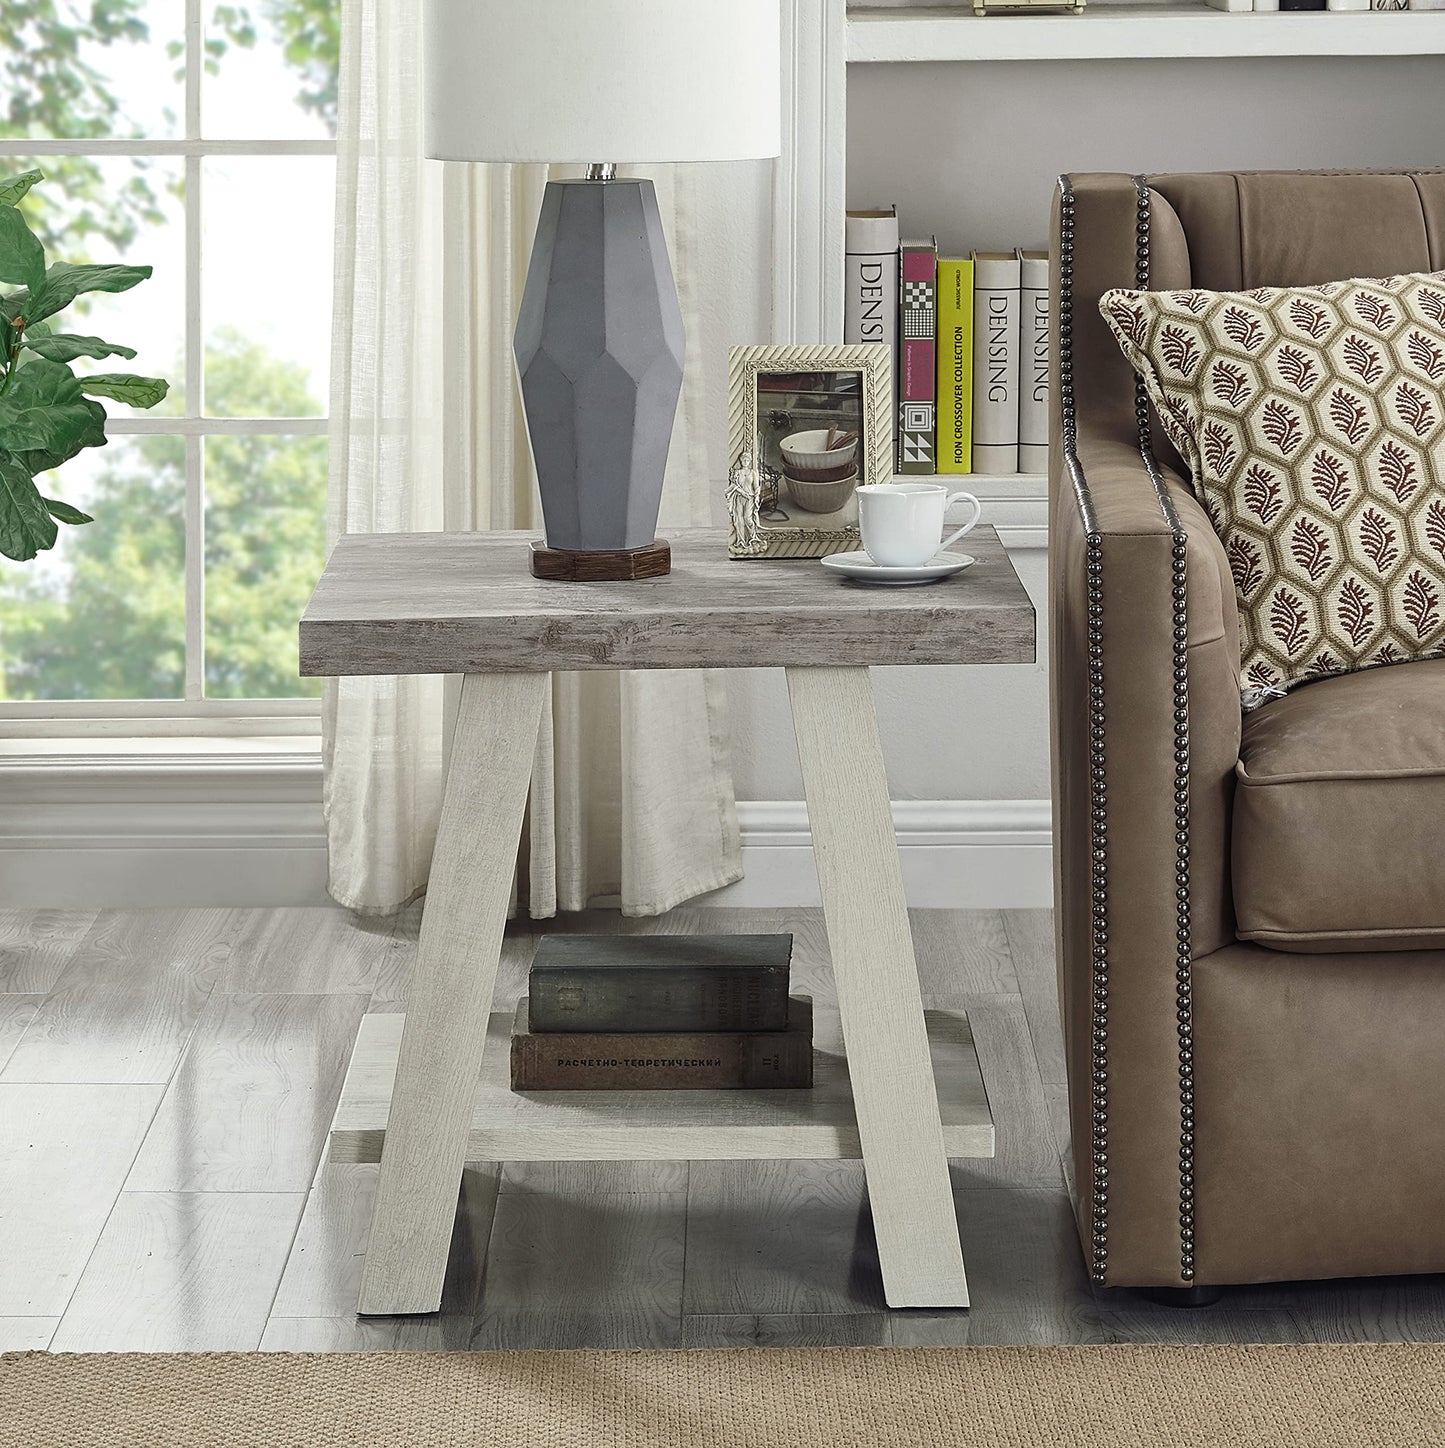 Roundhill Furniture Athens Contemporary Replicated Wood Regular End Table, Weathered Gray and Beige